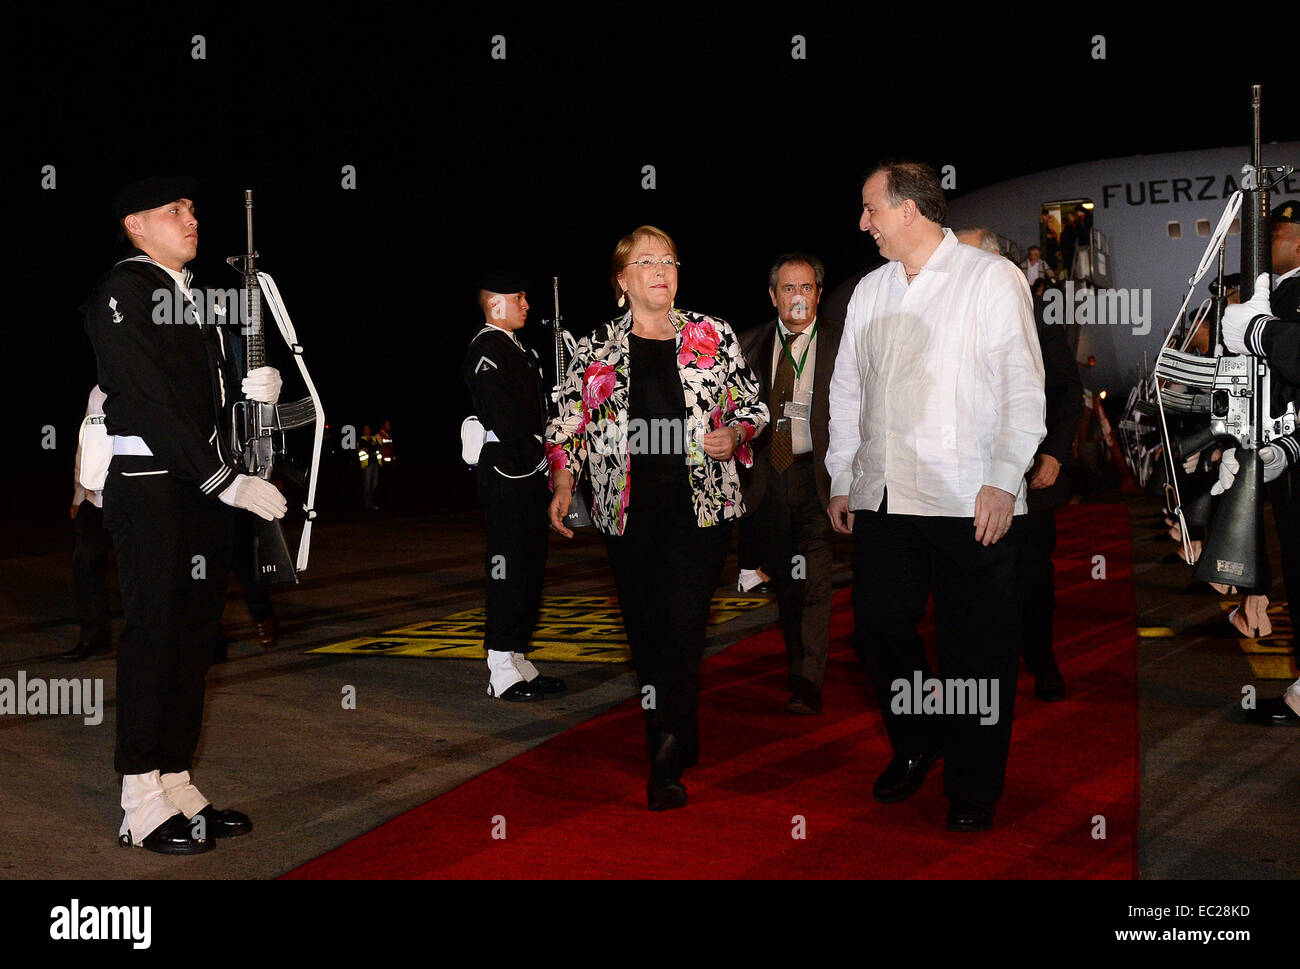 Veracruz, Mexico. 7th Dec, 2014. Image provided by Chile's Presidency shows Chilean President Michelle Bachelet (2-L-Front) and Mexican Foreign Affairs Secretary Jose Antonio Meade Kuribrena (R-Front) talking after Bachelet's arrival to Heriberto Jara Corona International Airport in Veracruz, Mexico, on Dec. 7, 2014. Bachelet arrived in Veracruz to participate in the 24th Ibero-American Summit, according to the local press. © Chile's Presidency/Xinhua/Alamy Live News Stock Photo